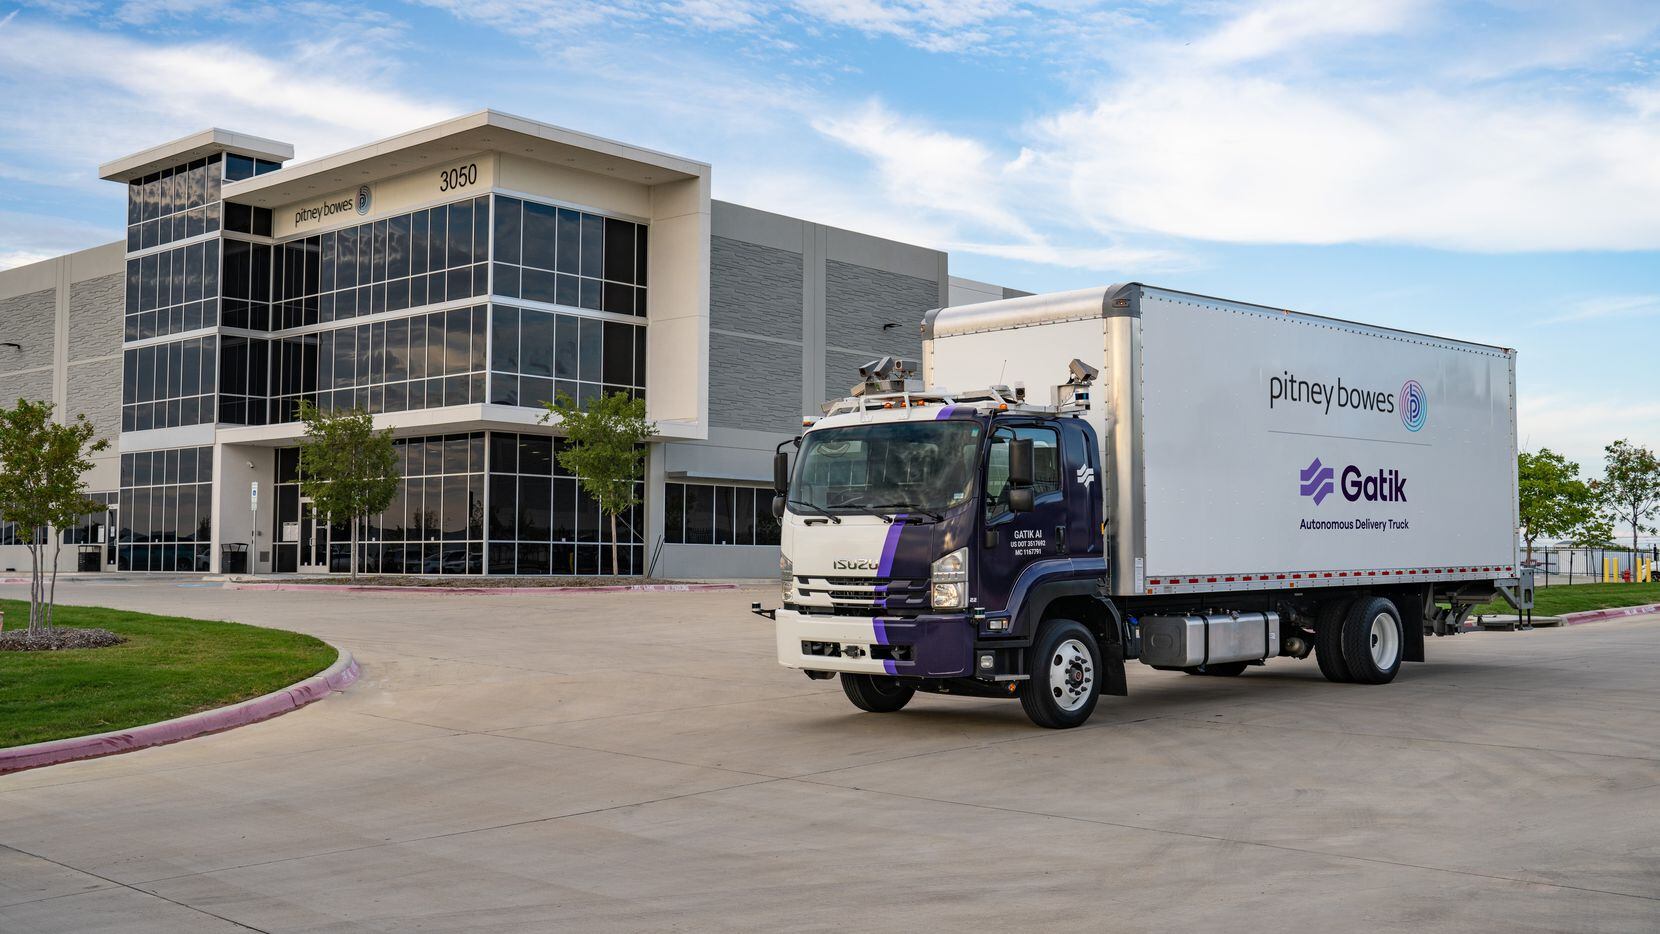 Gatik and Pitney Bowes are partnering to bring self-driving trucks to Dallas.